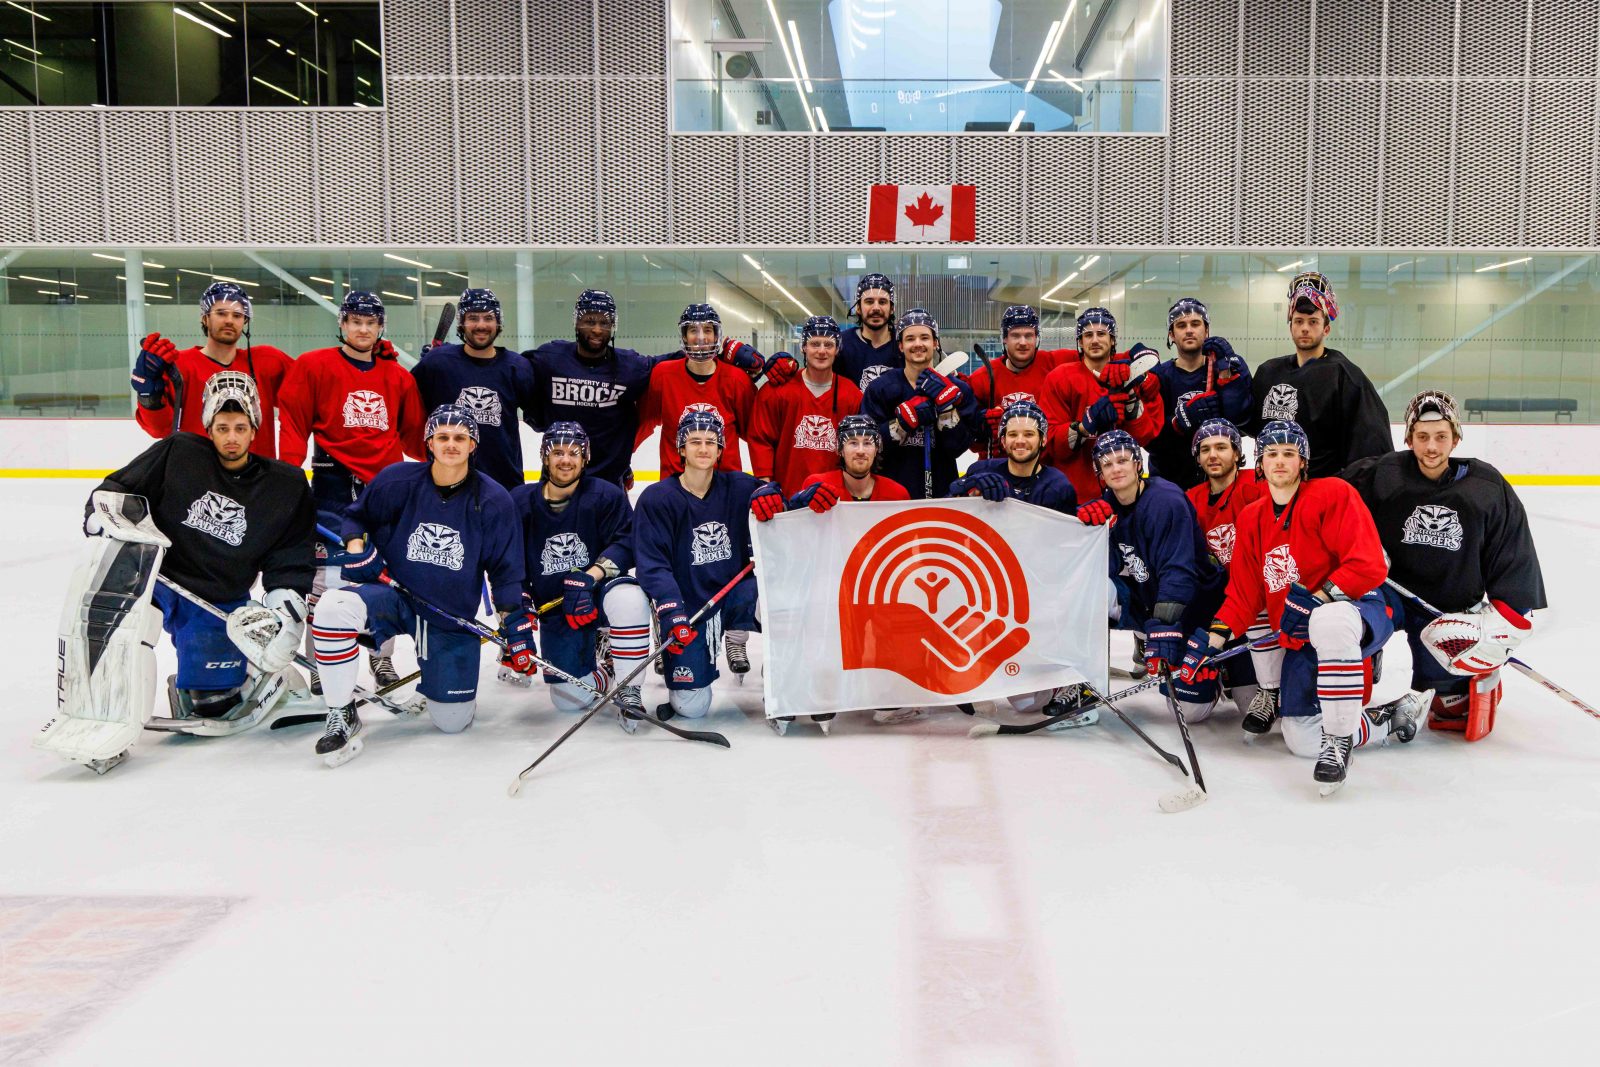 The Brock University Badgers men’s hockey team poses on a sheet of ice holding the United Way flag.